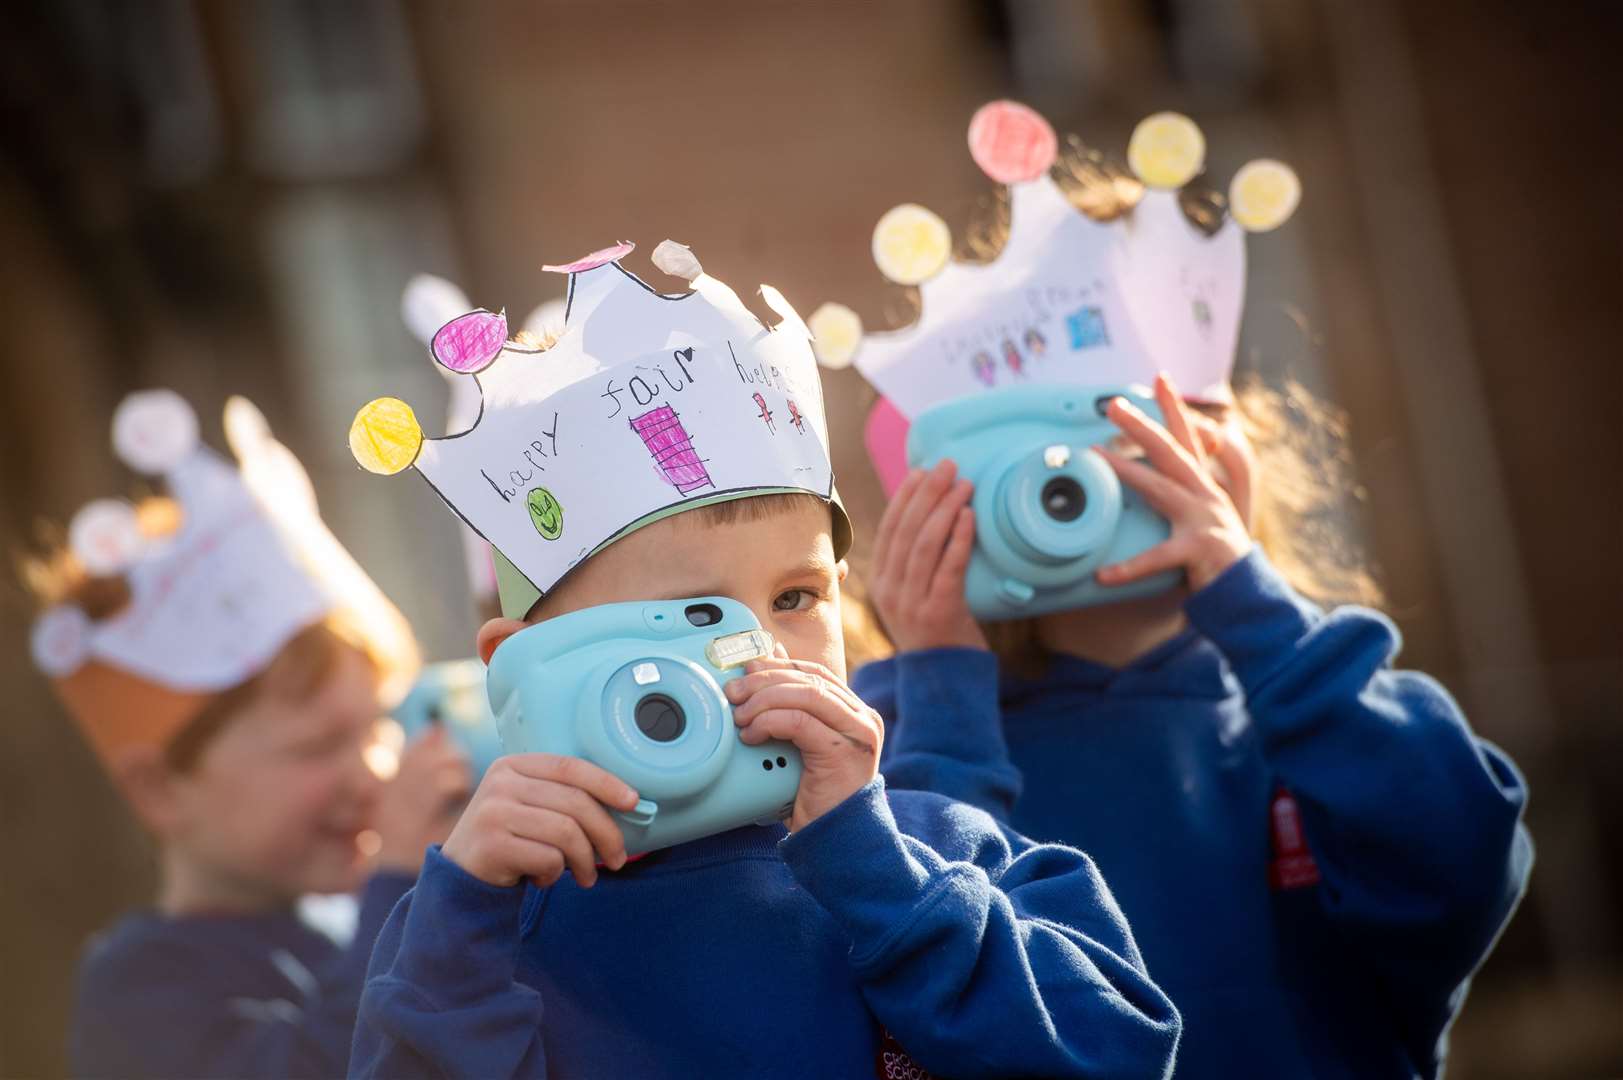 Cameras are being used by children to capture what matters to them in the Crown area.